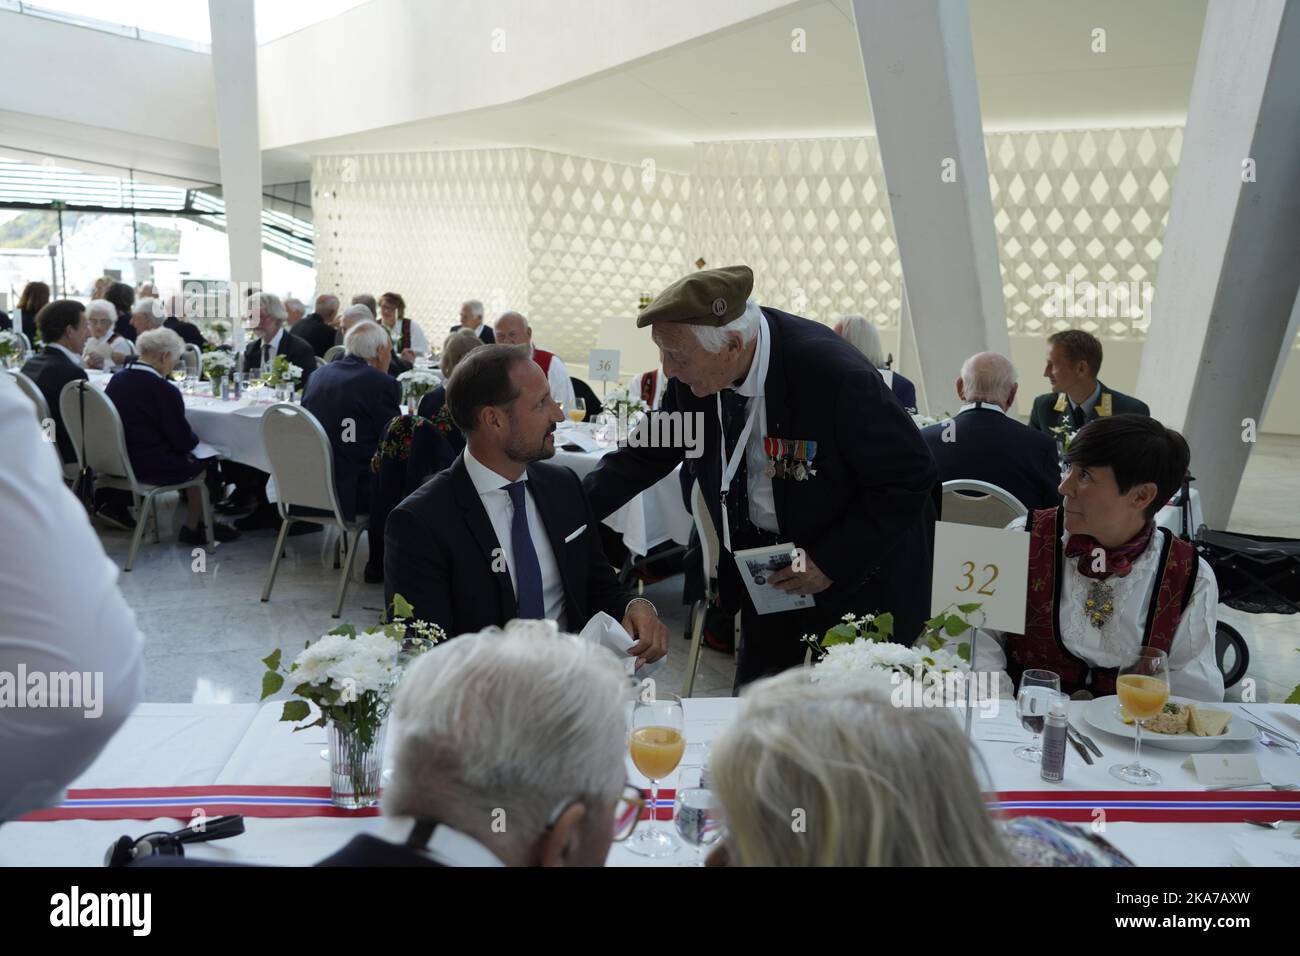 Oslo 20210819. August Rathke in conversation with Crown Prince Haakon and Foreign Minister Ine Marie Eriksen Søreide during the government's lunch for war sailors, veterans and witnesses from World War II at the Opera House in Oslo on Thursday. Last year's 75th anniversary was postponed due to the Corona pandemic. Photo: Heiko Junge / NTB / POOL  Stock Photo